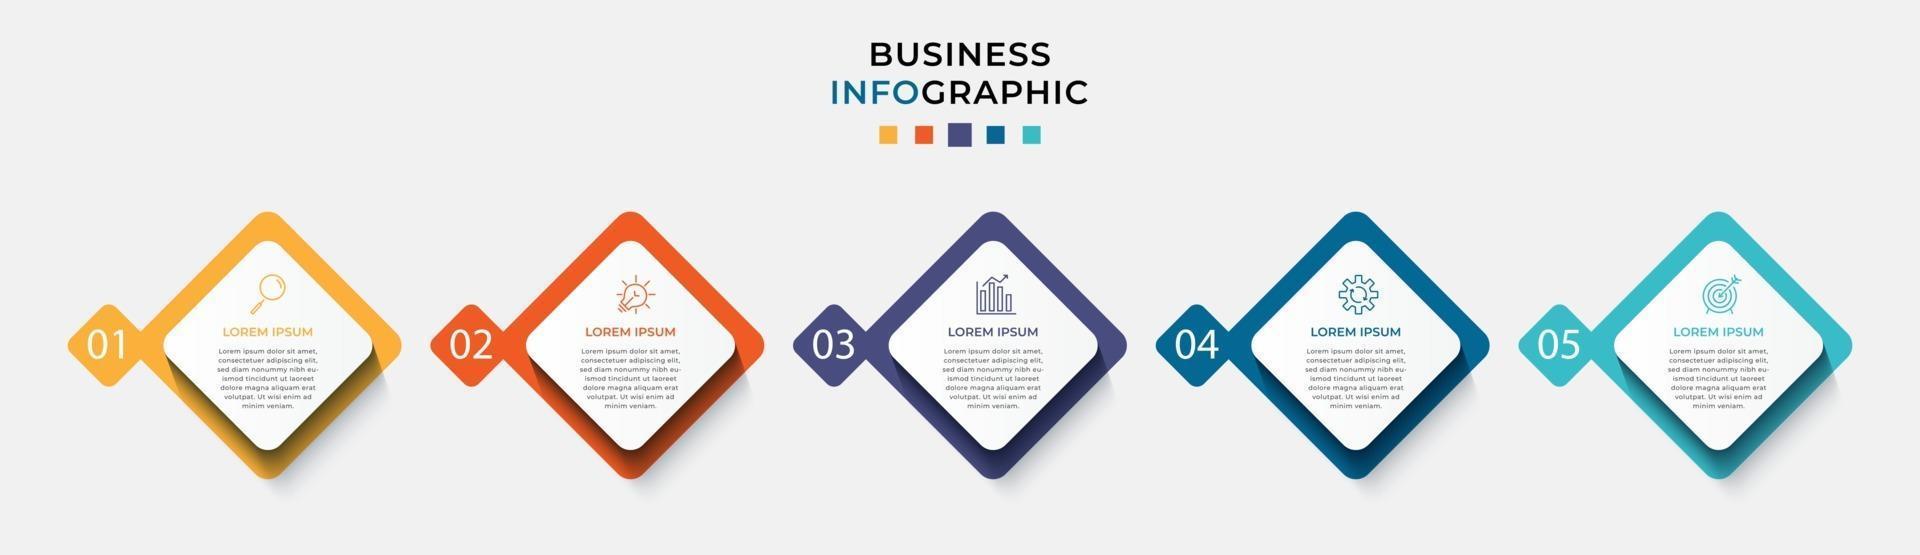 Business Infographic design template Vector with icons and 5 five options or steps